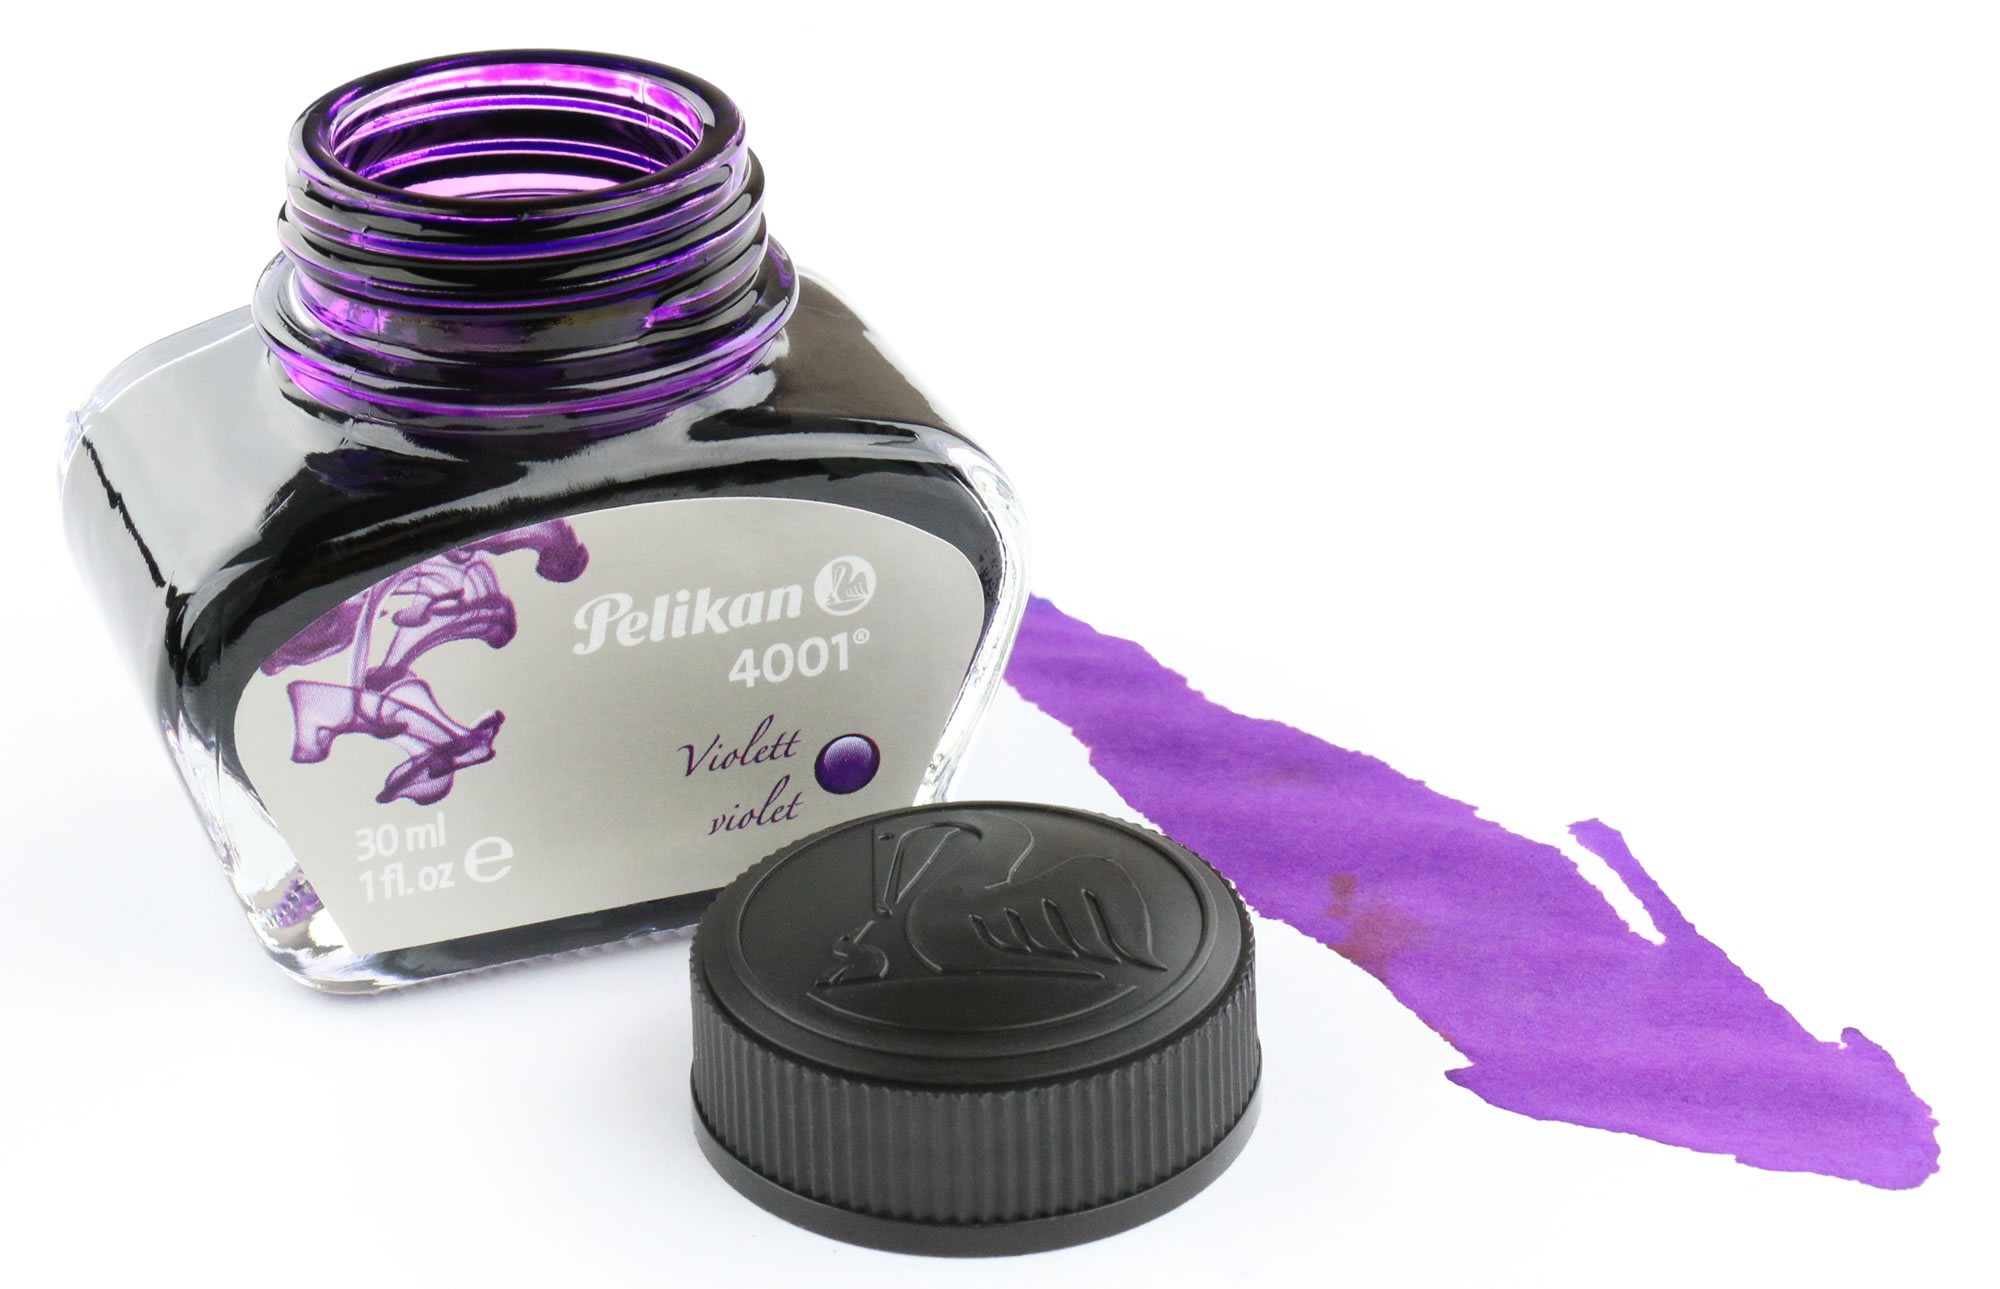 Stunning Noodler's Inks - and an apology! 